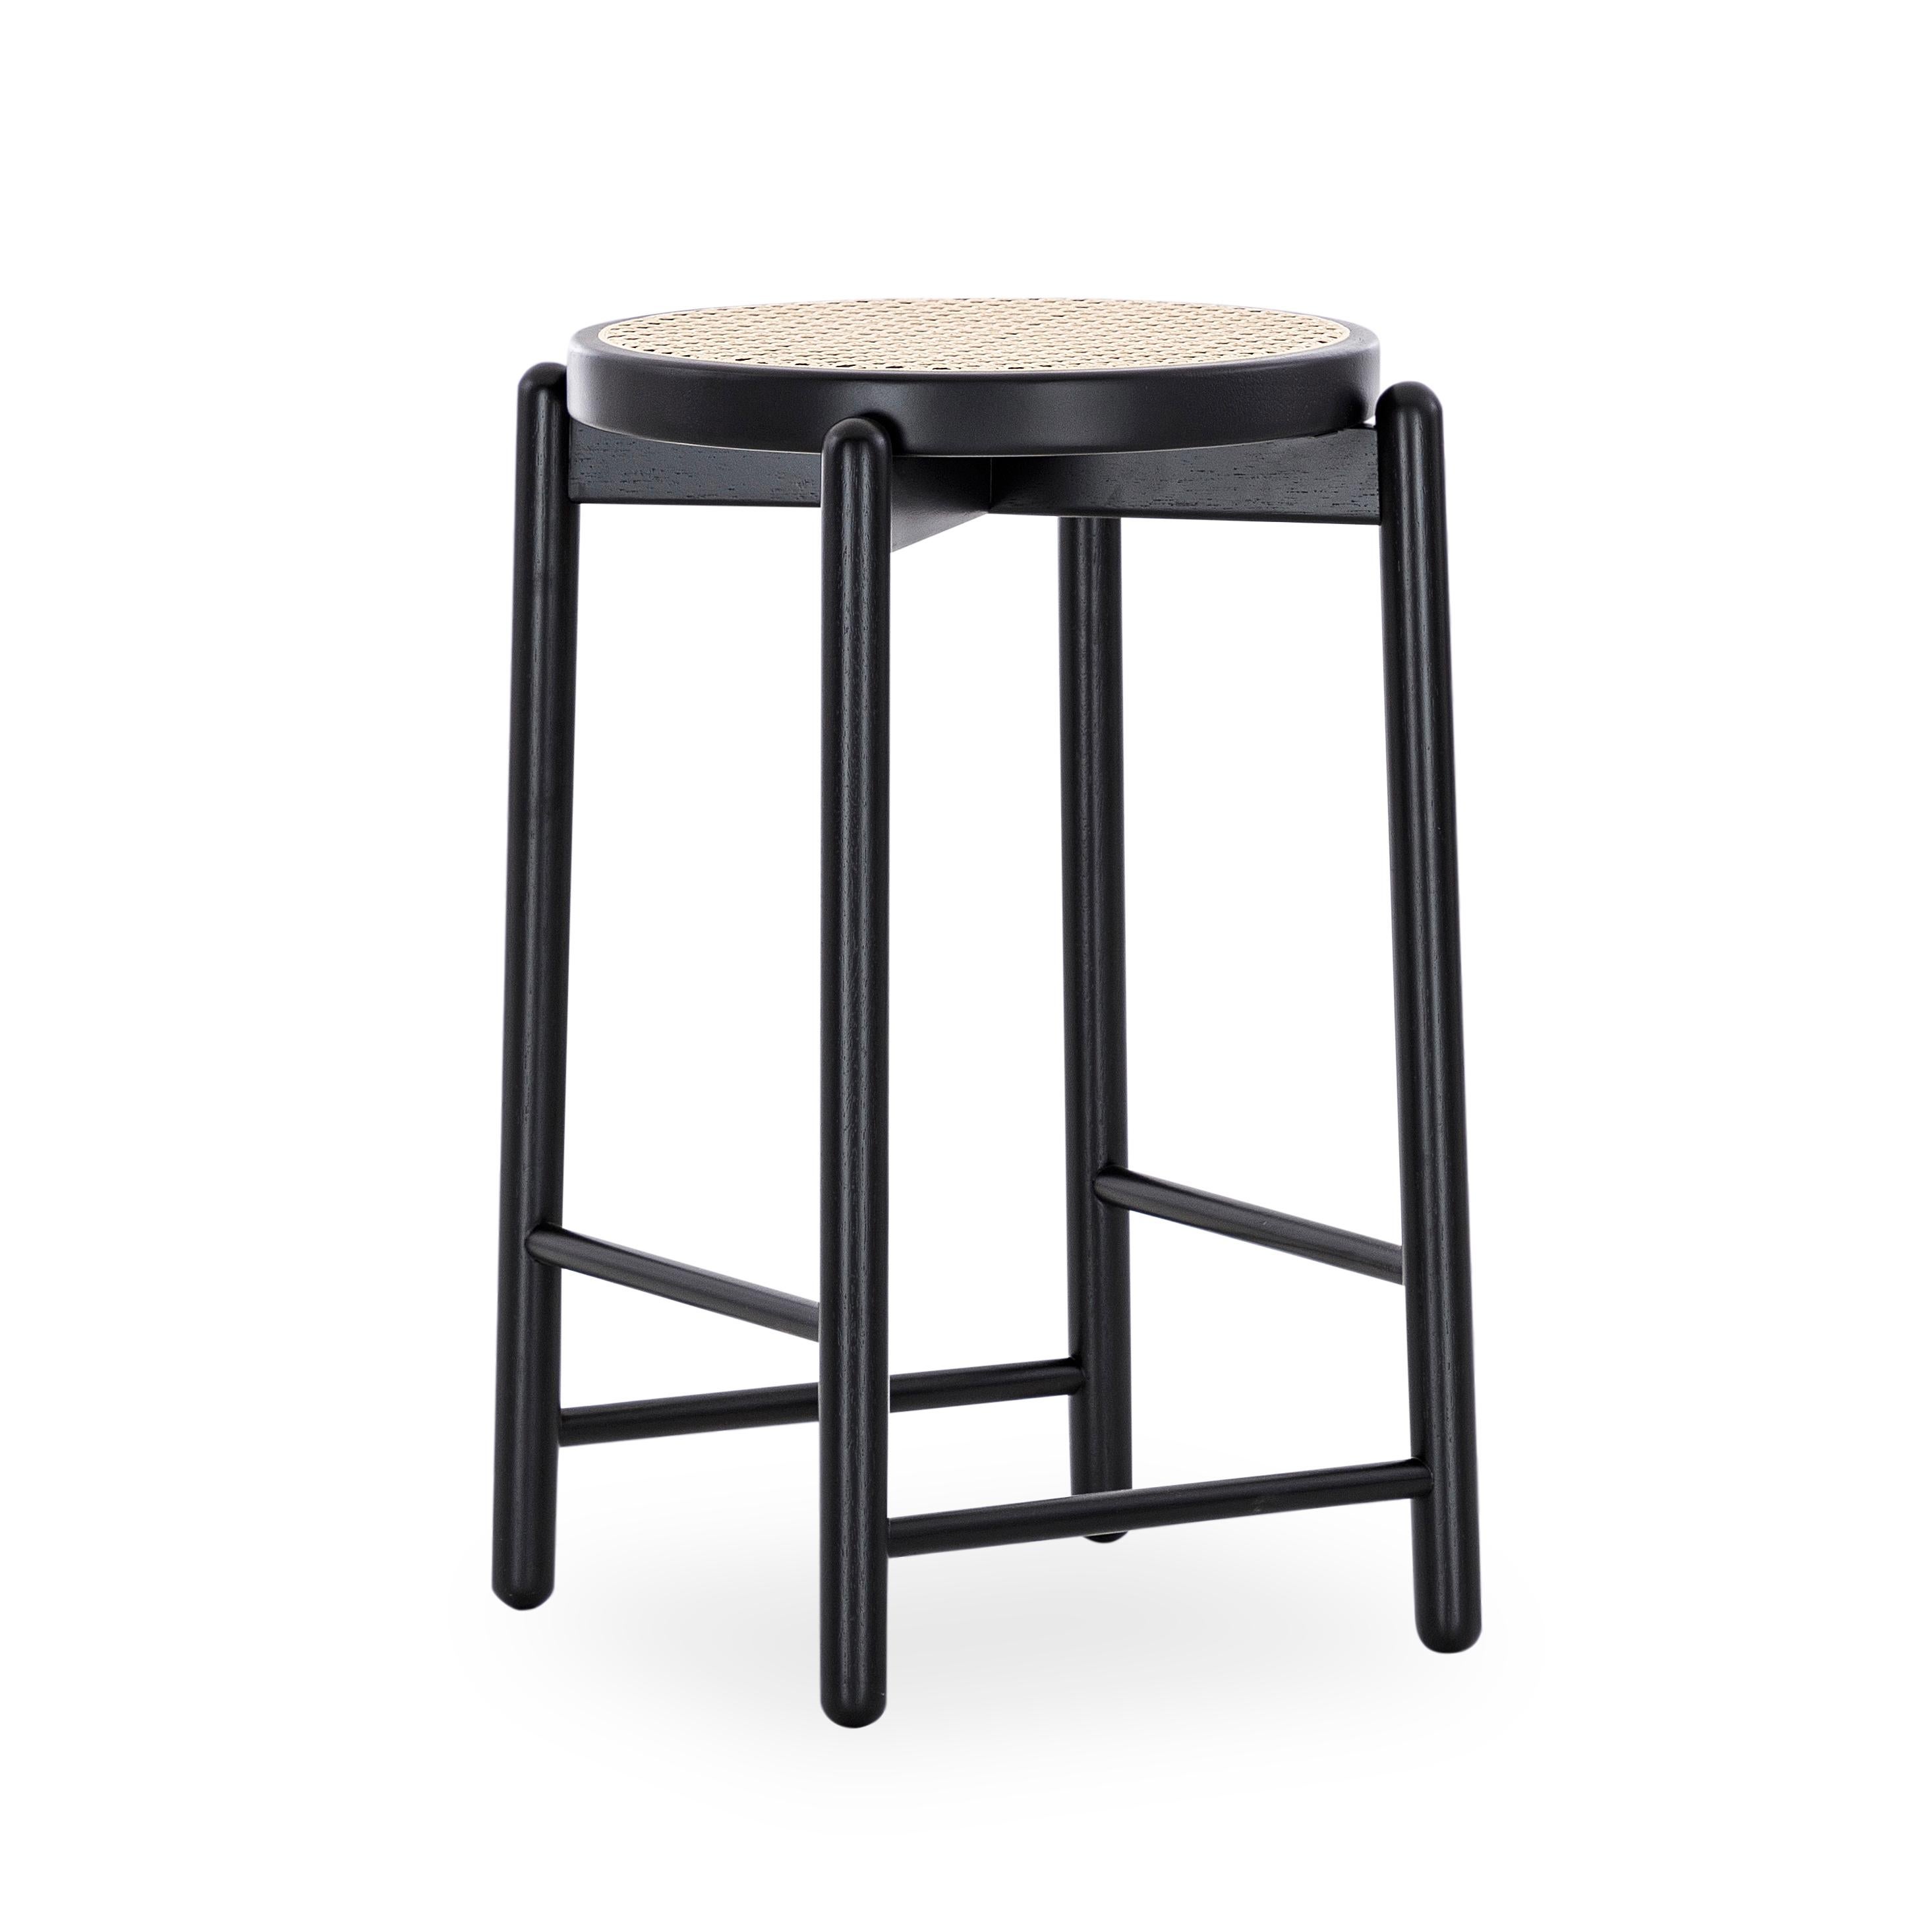 Our Uultis team has designed this Maru counter stool in a black wood base with a cane seat that it will stop being only a decoration counter stool to become part of the day-to-day lives of those who experience enriching cultural activities. The Maru